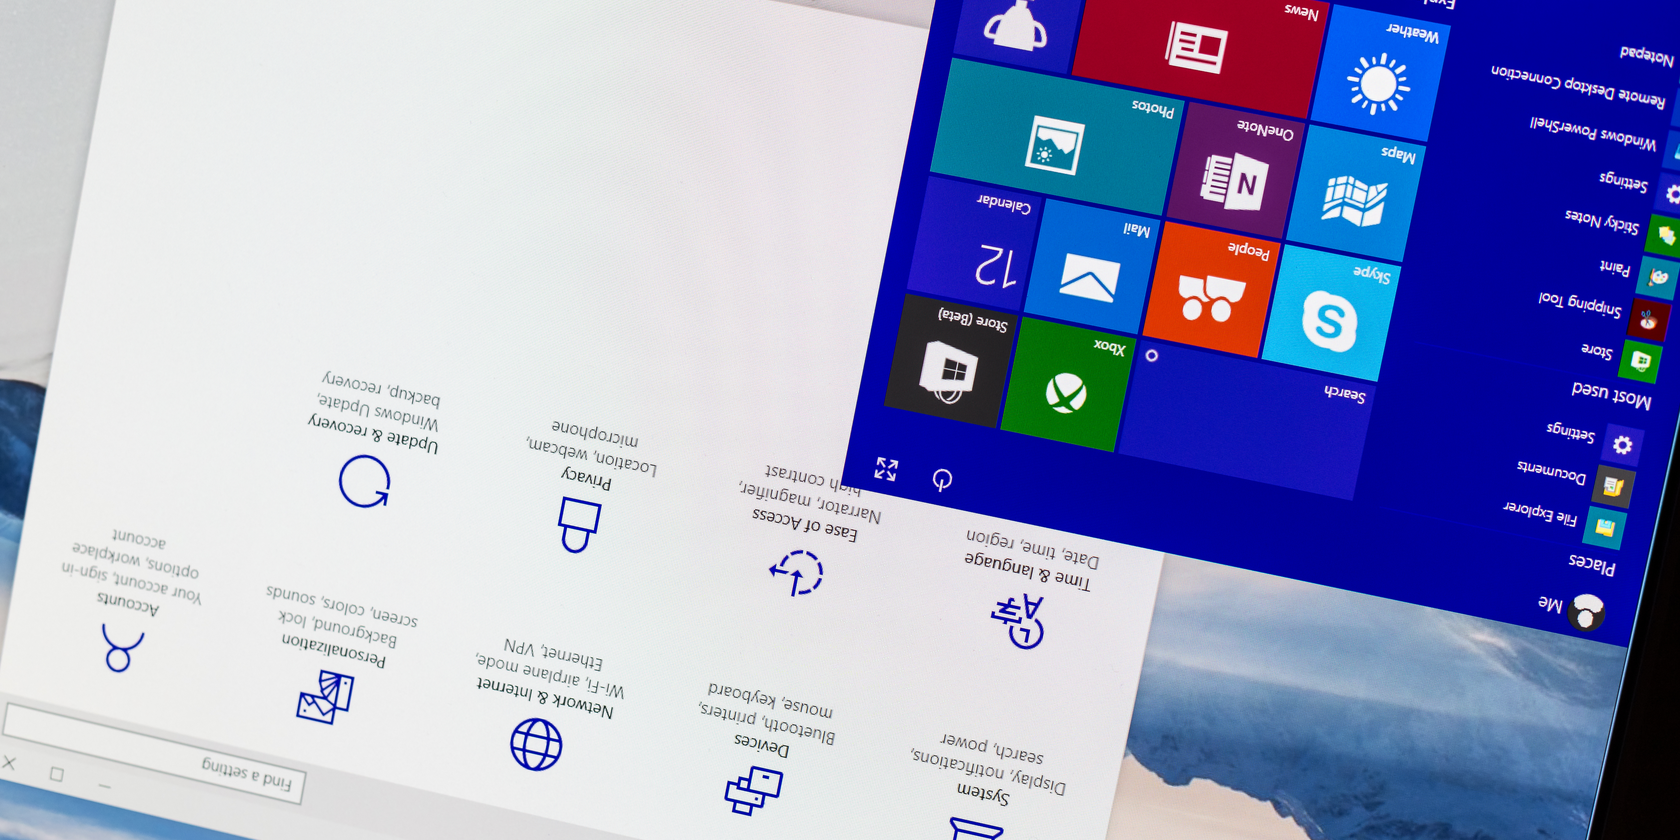 How to Fix an Upside Down Screen in Windows 10